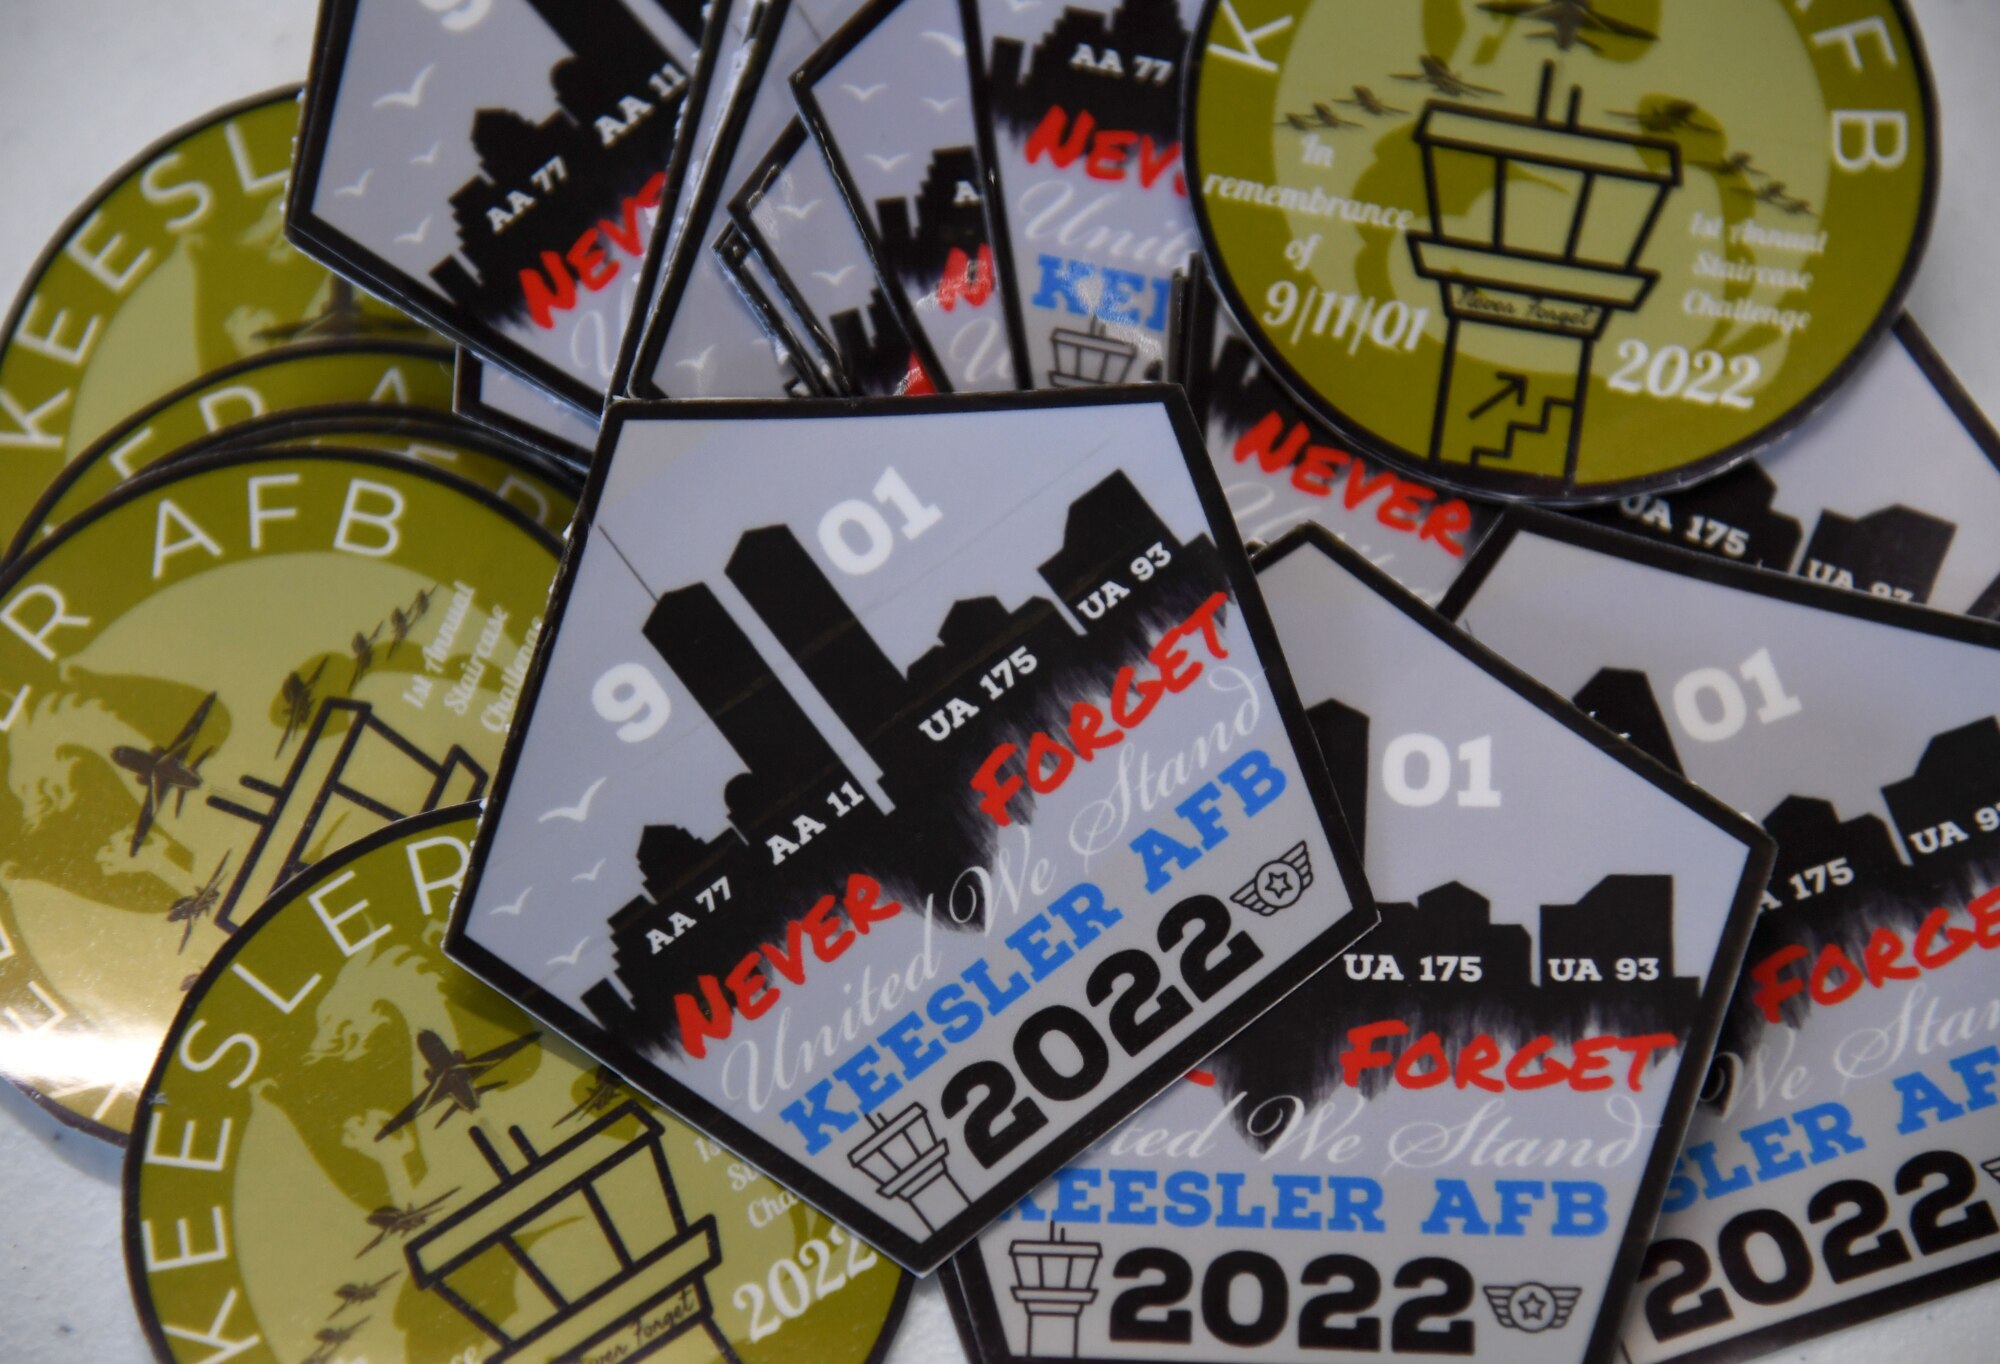 Stickers are displayed during the 9/11 Tower Run inside the air traffic control tower at Keesler Air Force Base, Mississippi, Sept. 9, 2022. The event honored those who lost their lives during the 9/11 attacks. (U.S. Air Force photo by Kemberly Groue)